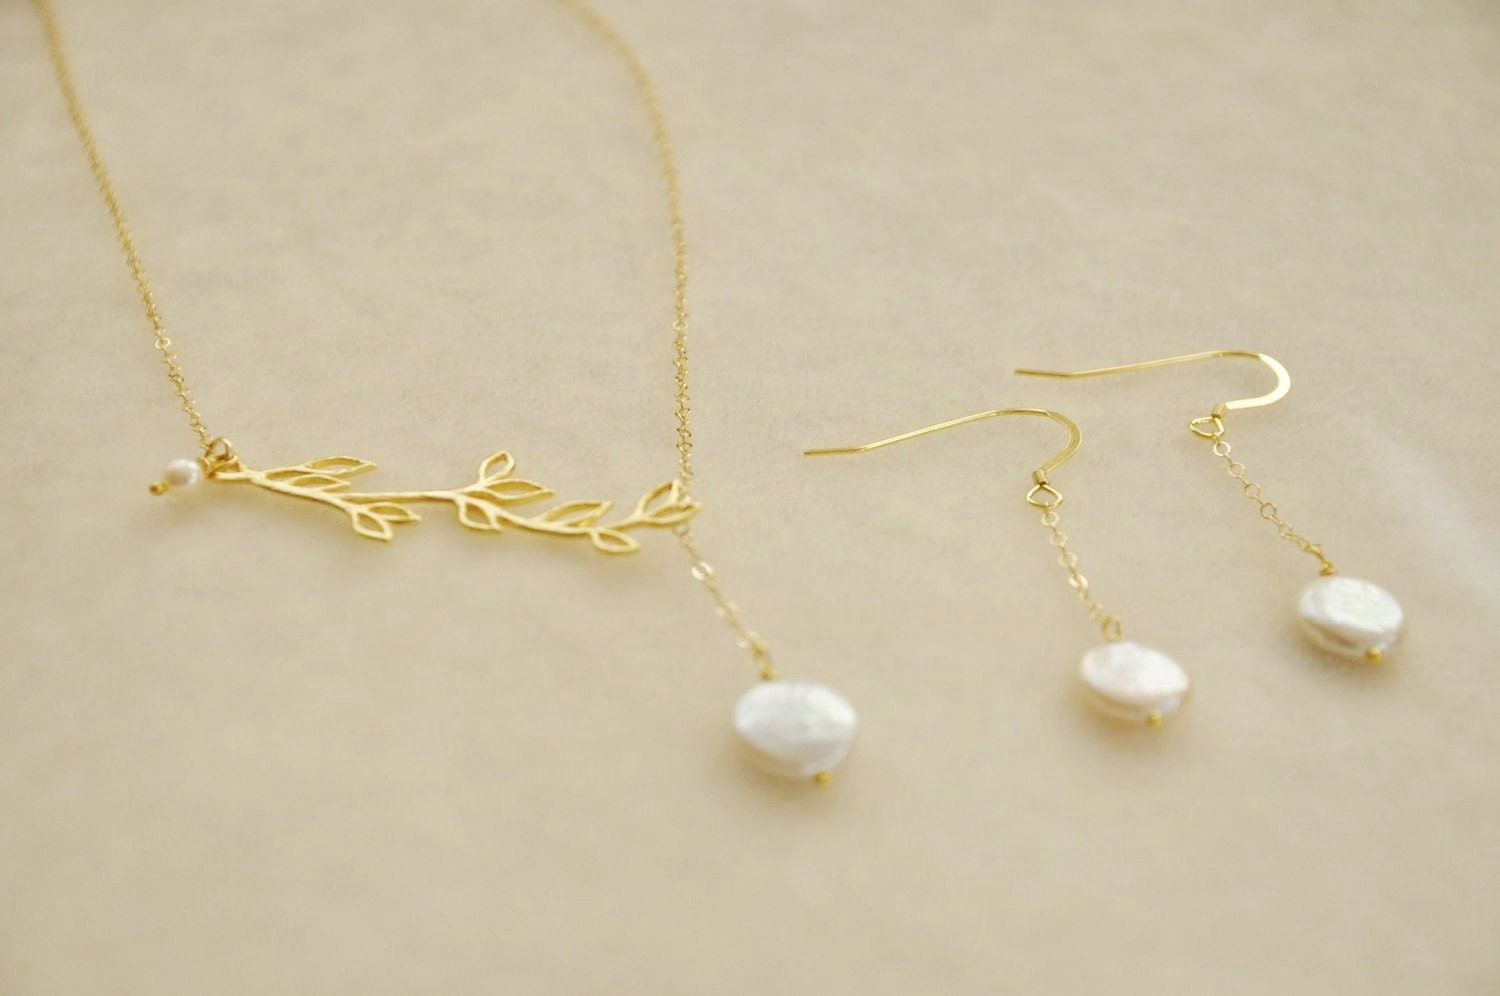 Gold Olive Branch Adjustable Lariat Jewelry Set with Freshwater Pearls - Bridesmaids Gift Set, Wedding Jewelry, Dangle earrings